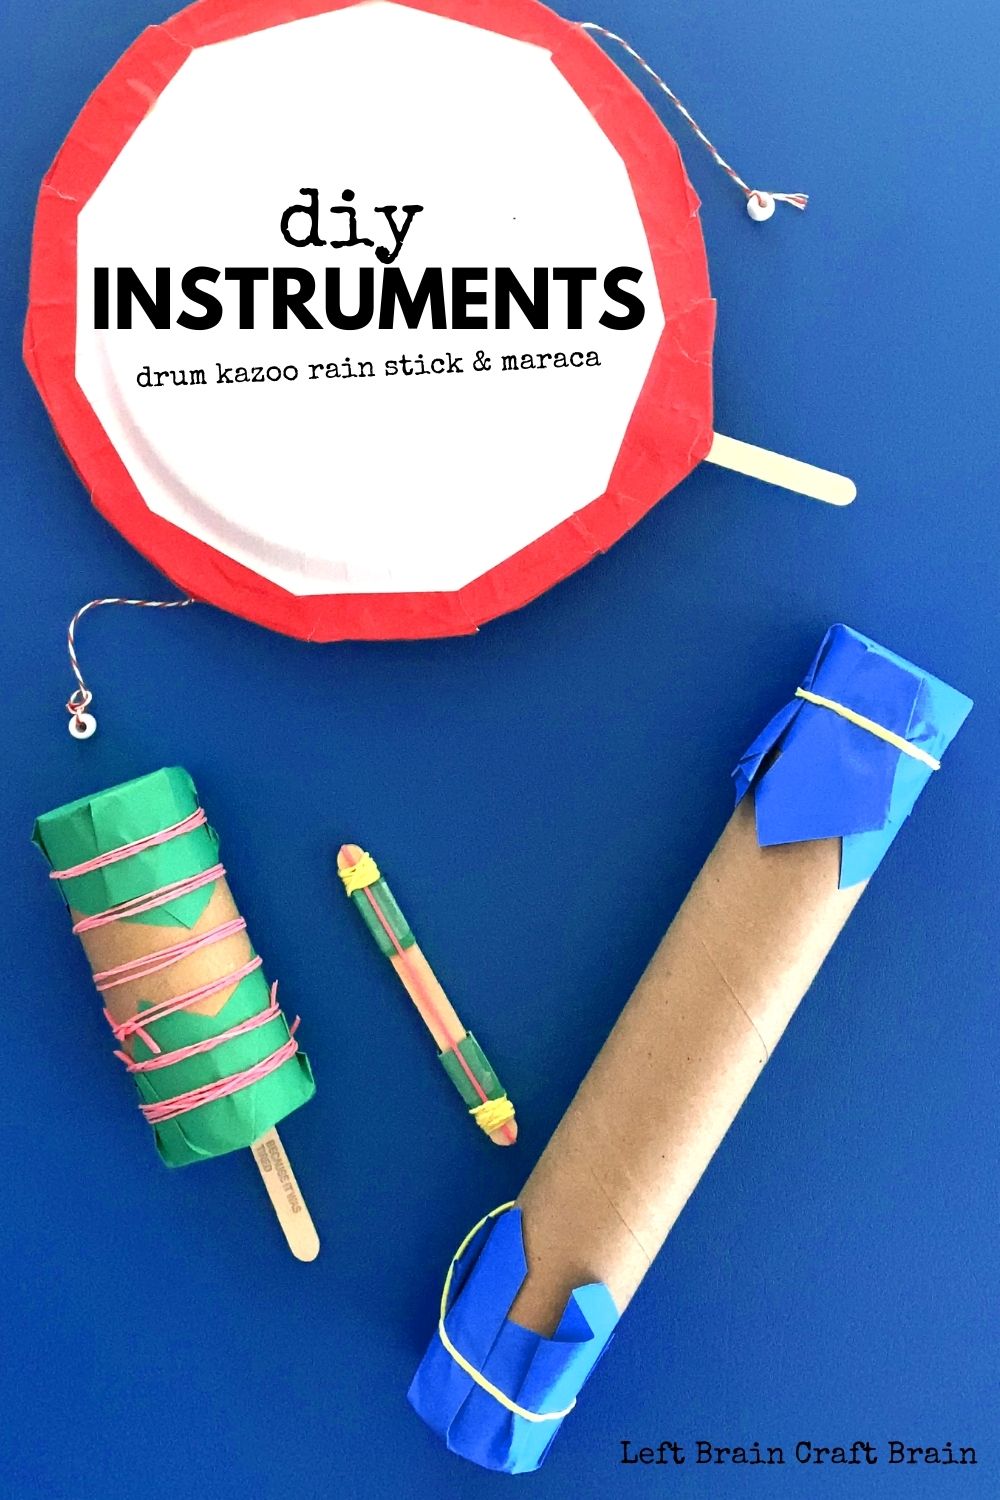 Make fun DIY instruments with just a few craft supplies. Popsicle stick kazoos, paper plate drums, rain sticks, and maracas will keep the kids making music.